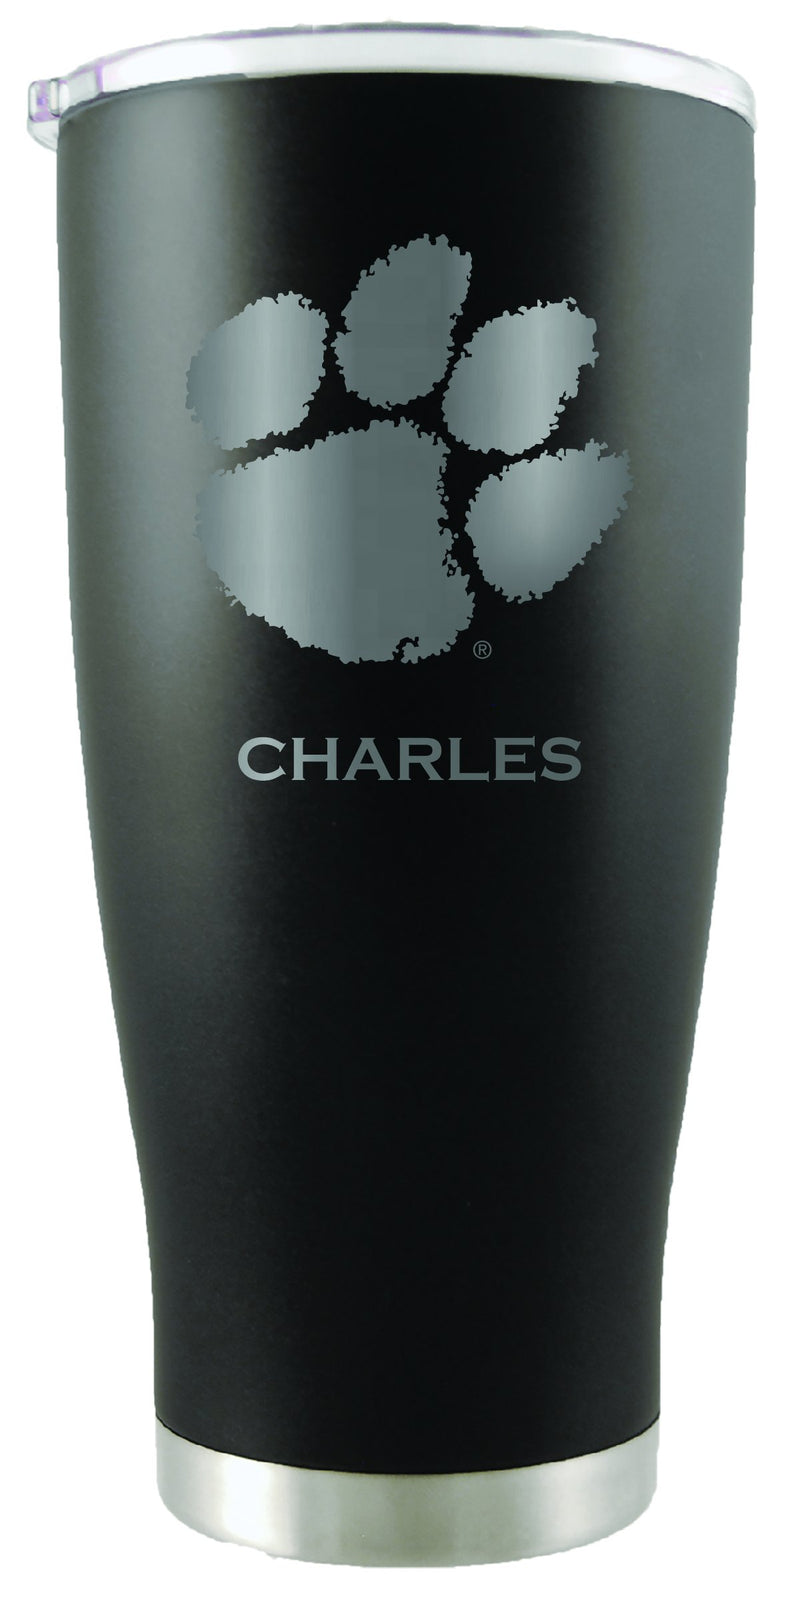 20oz Black Personalized Stainless Steel Tumbler | Clemson
Clemson Tigers, CLM, COL, CurrentProduct, Drinkware_category_All, Personalized_Personalized
The Memory Company